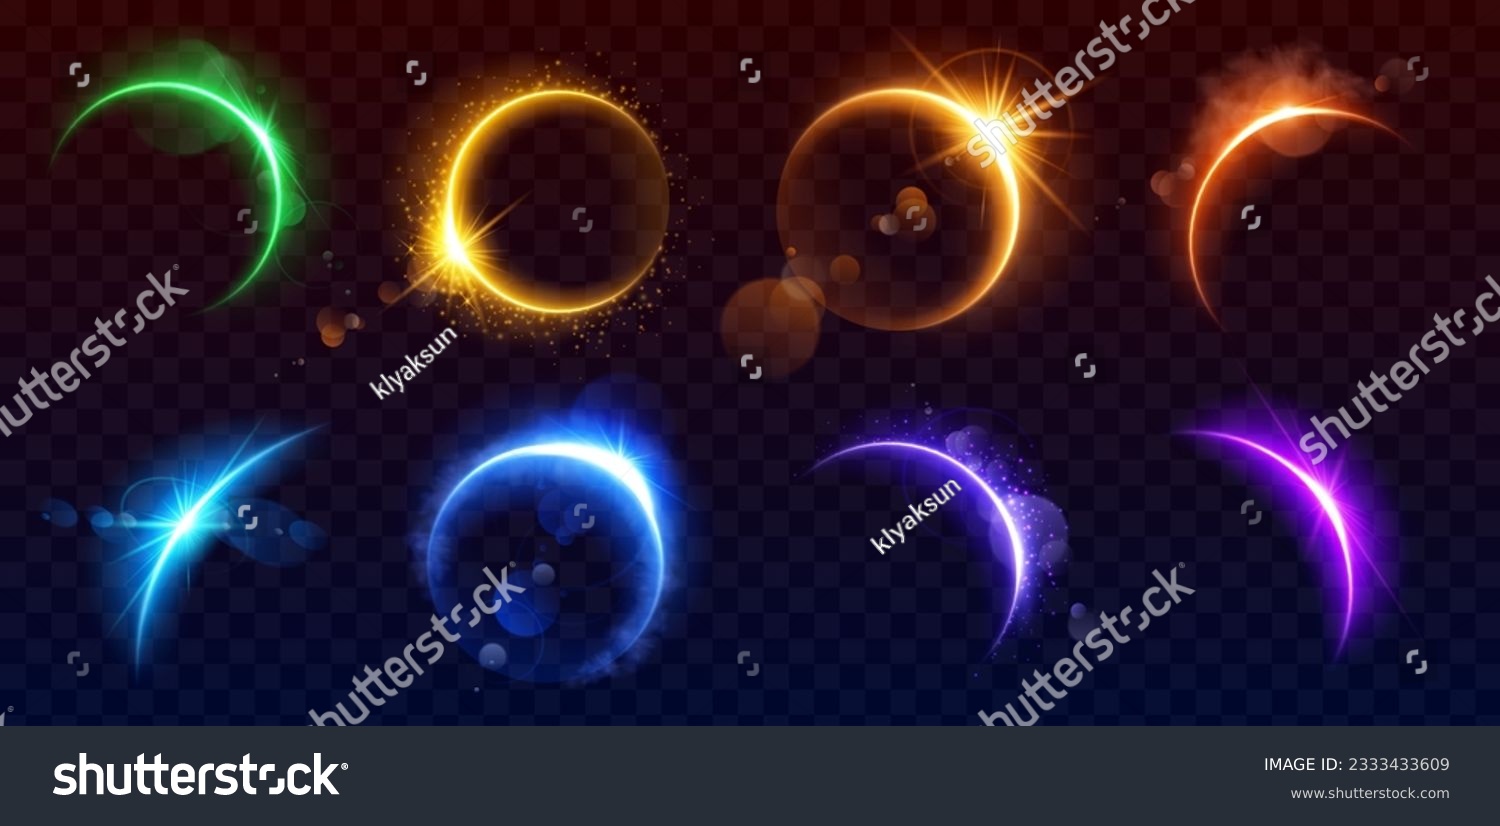 Realistic set of solar eclipse overlay effect on transparent background. Vector illustration of neon blue, yellow, green, purple blazing star edge behind planet in dark sky. Space design elements #2333433609